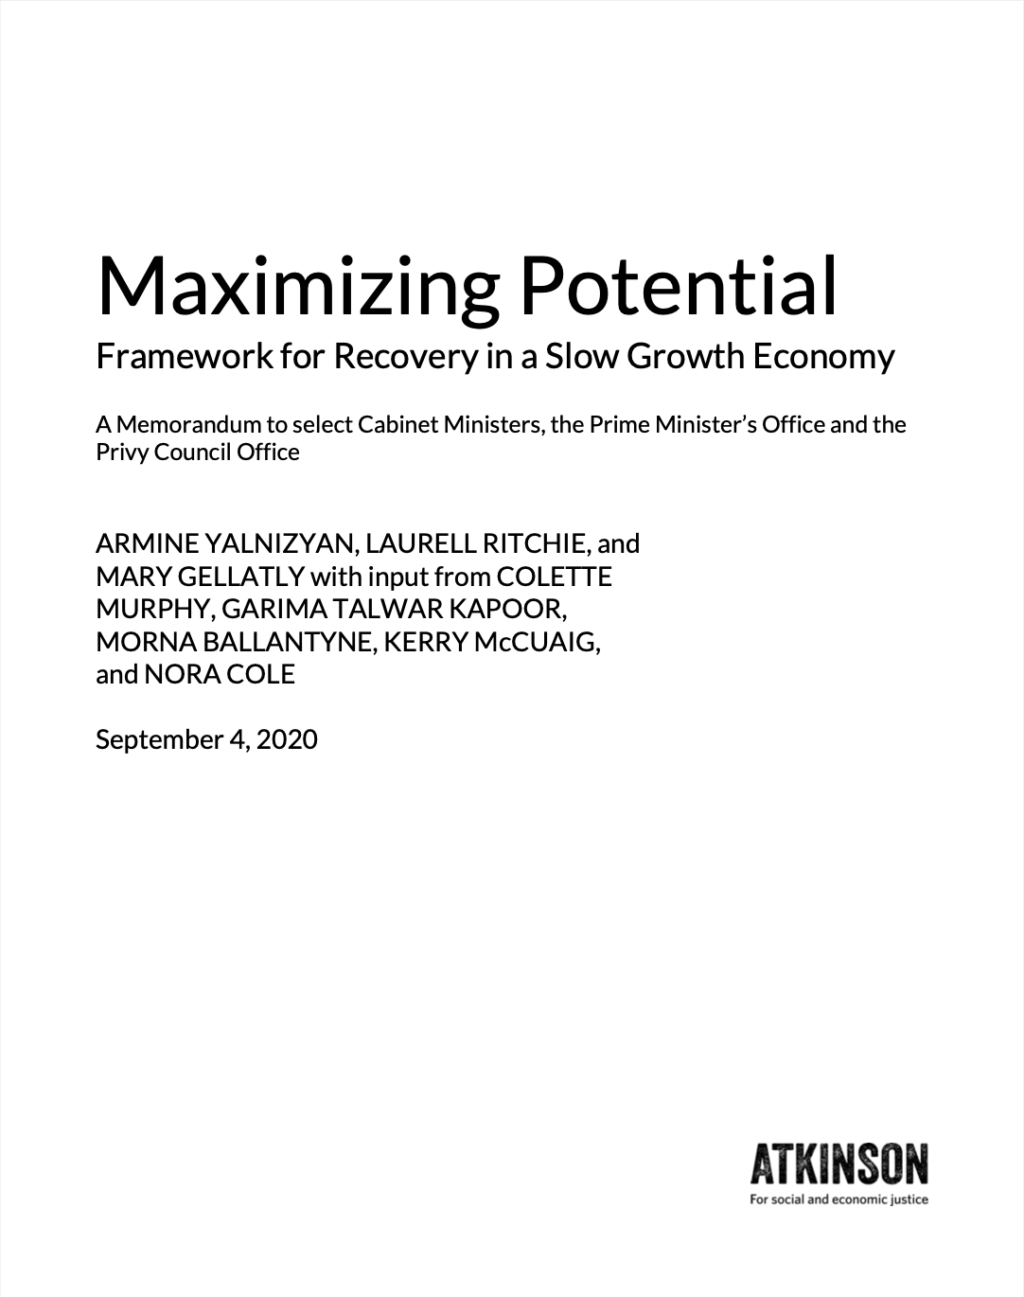 Cover Image: Maximizing Potential
